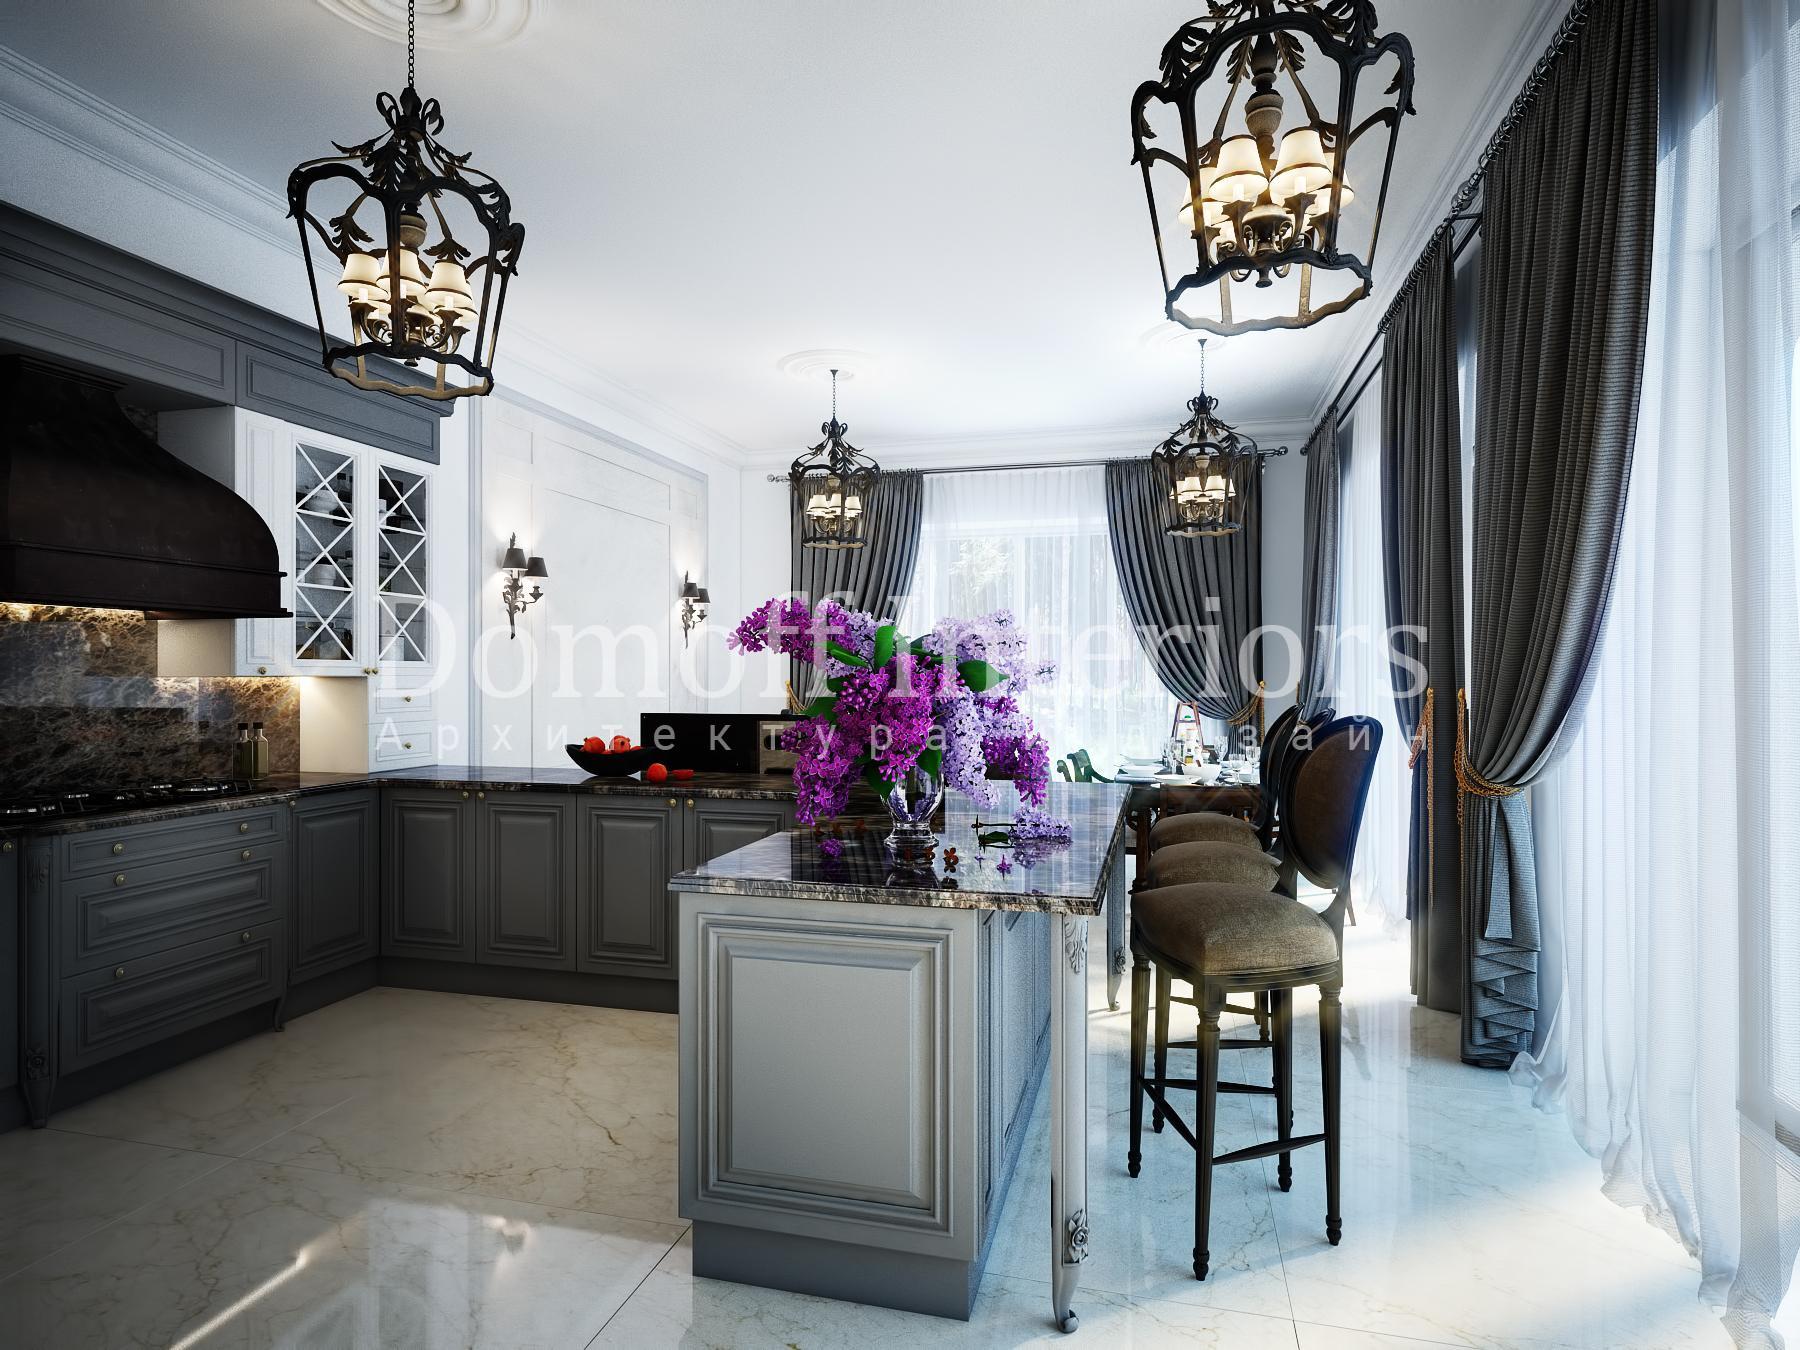 Kitchen made in the style of Contemporary classics